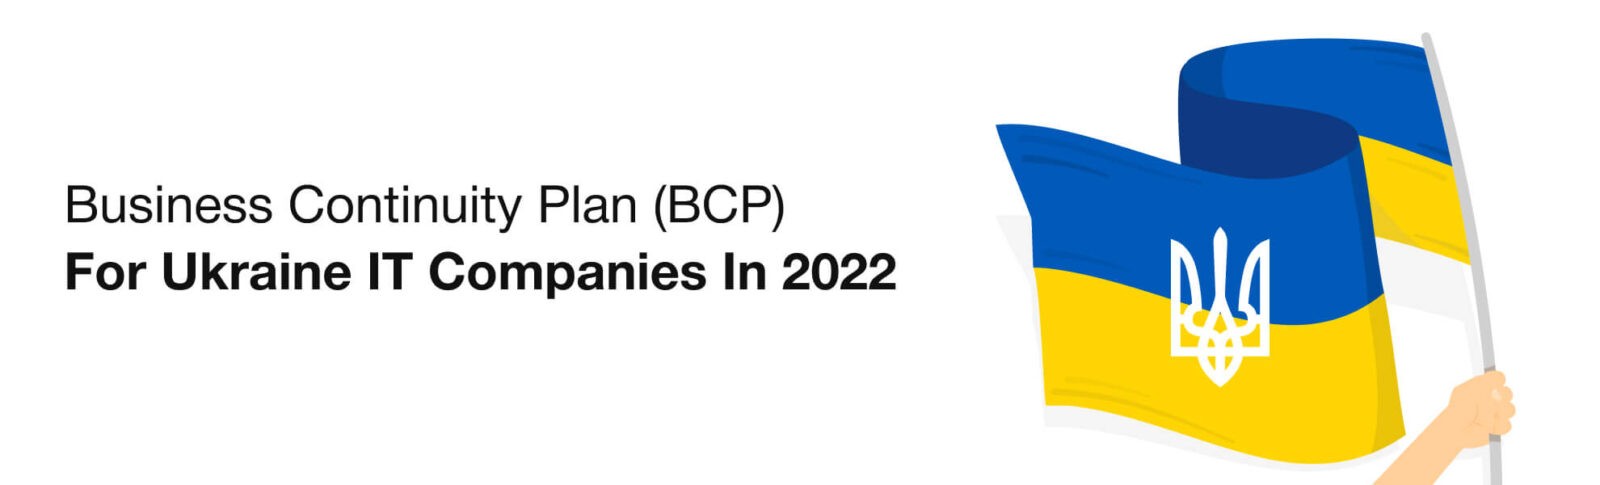 Business Continuity Plan (BCP) for Ukraine IT Companies in 2022